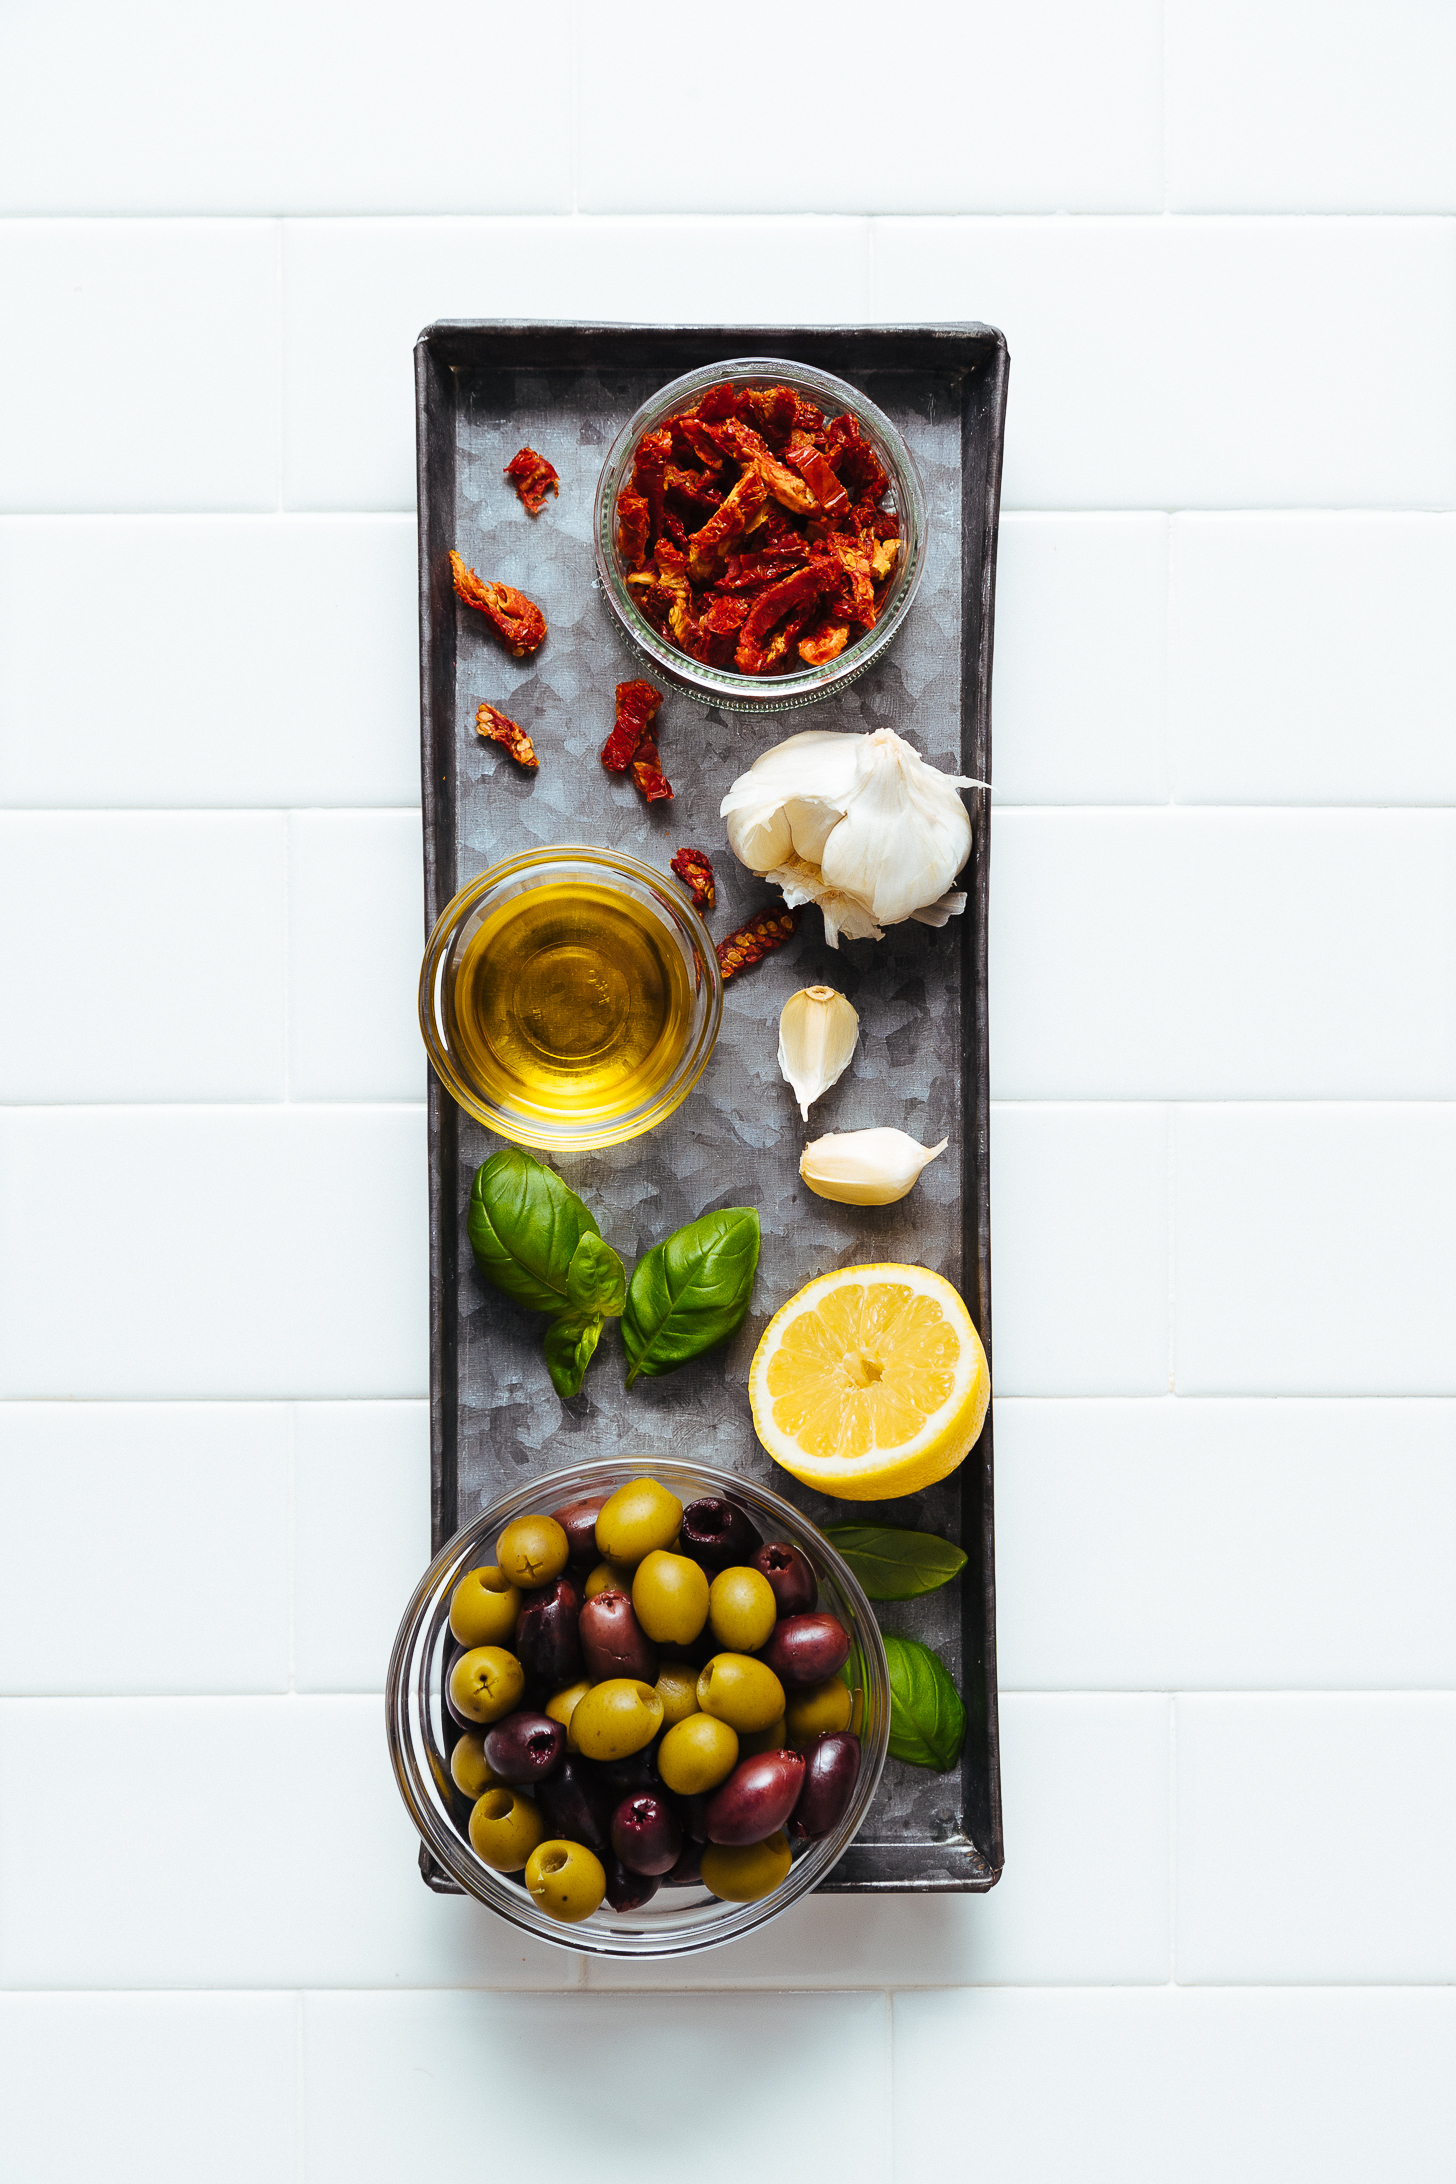 Tray of ingredients for making our Sun-Dried Tomato and Basil Olive Tapenade recipe